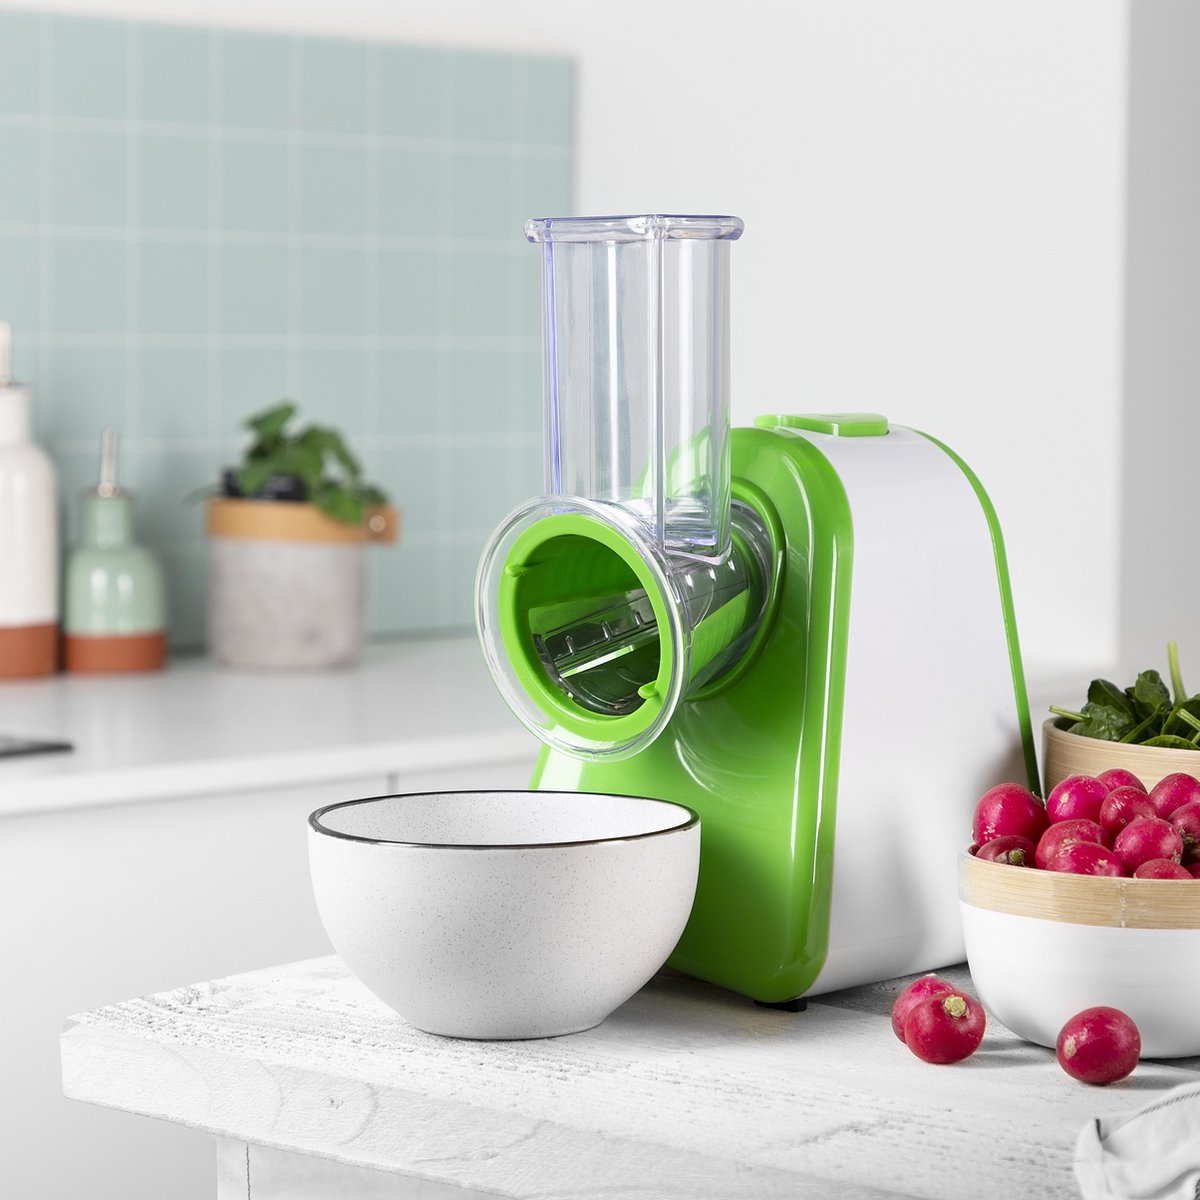 Tristar Salad Maker 200W Green and White